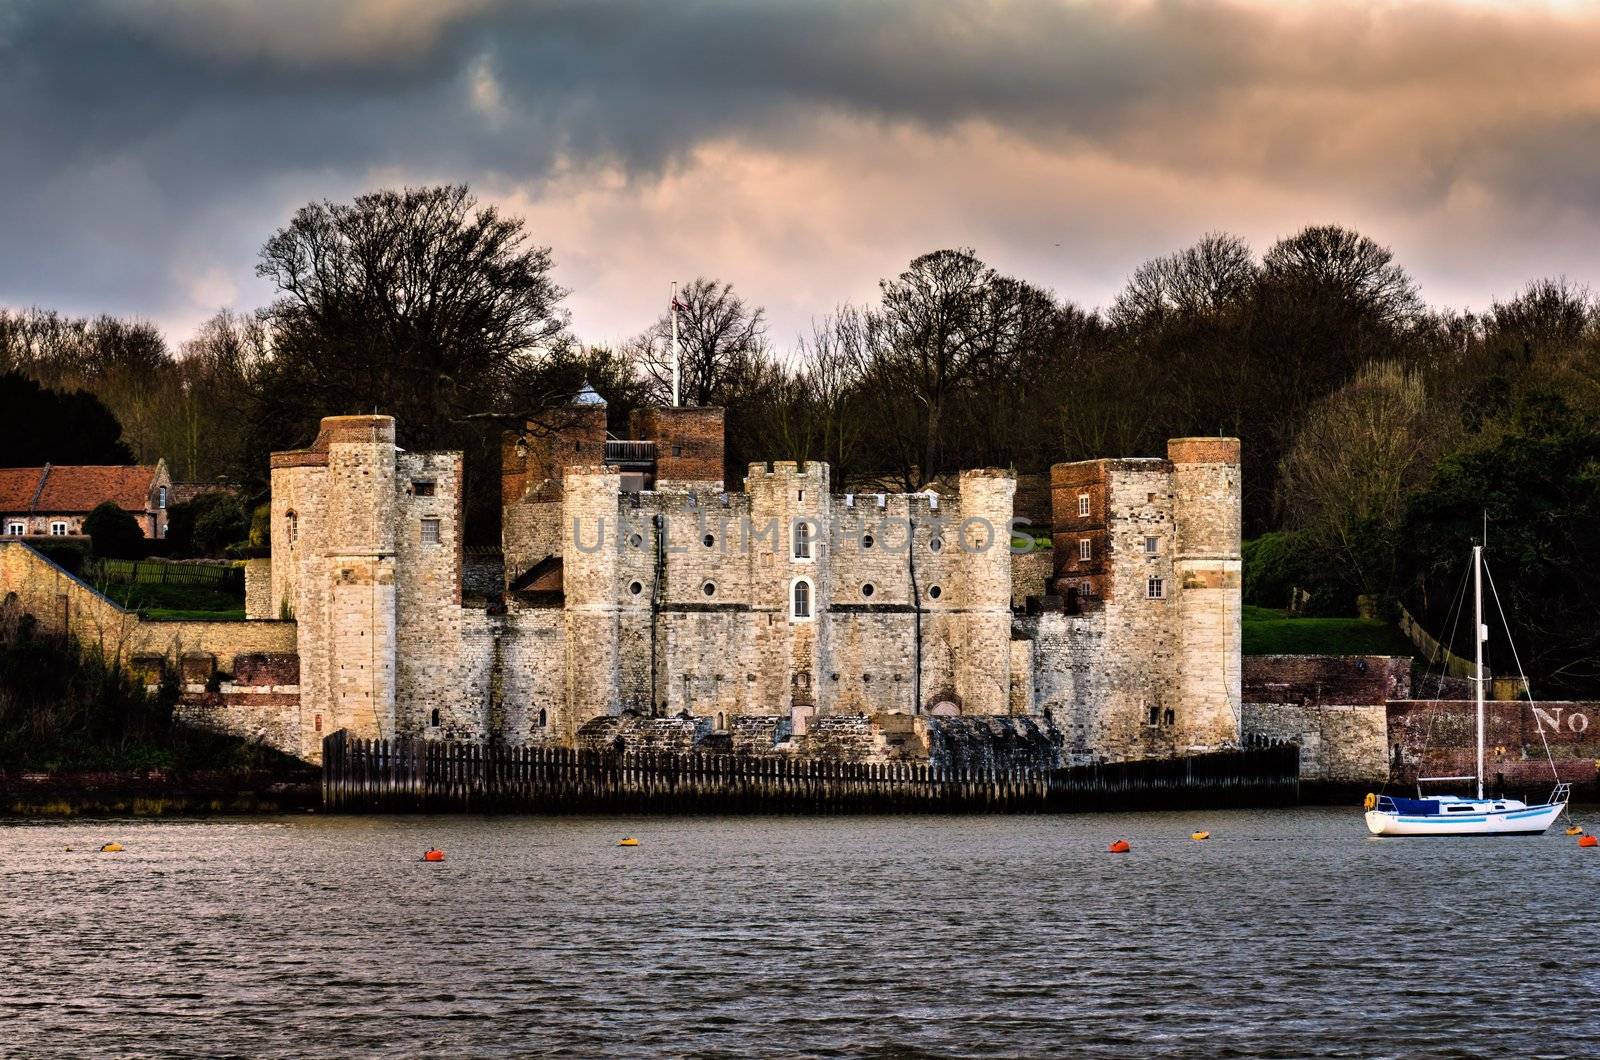 Upnor castle on the river Medway in Kent was built in 1559 to defend ships moored on the river medway at Chatham Dockyards, although it failed in 1667 when the Dutch sailed straight past it to capture and burn many ships of the english fleet anchored nearby.